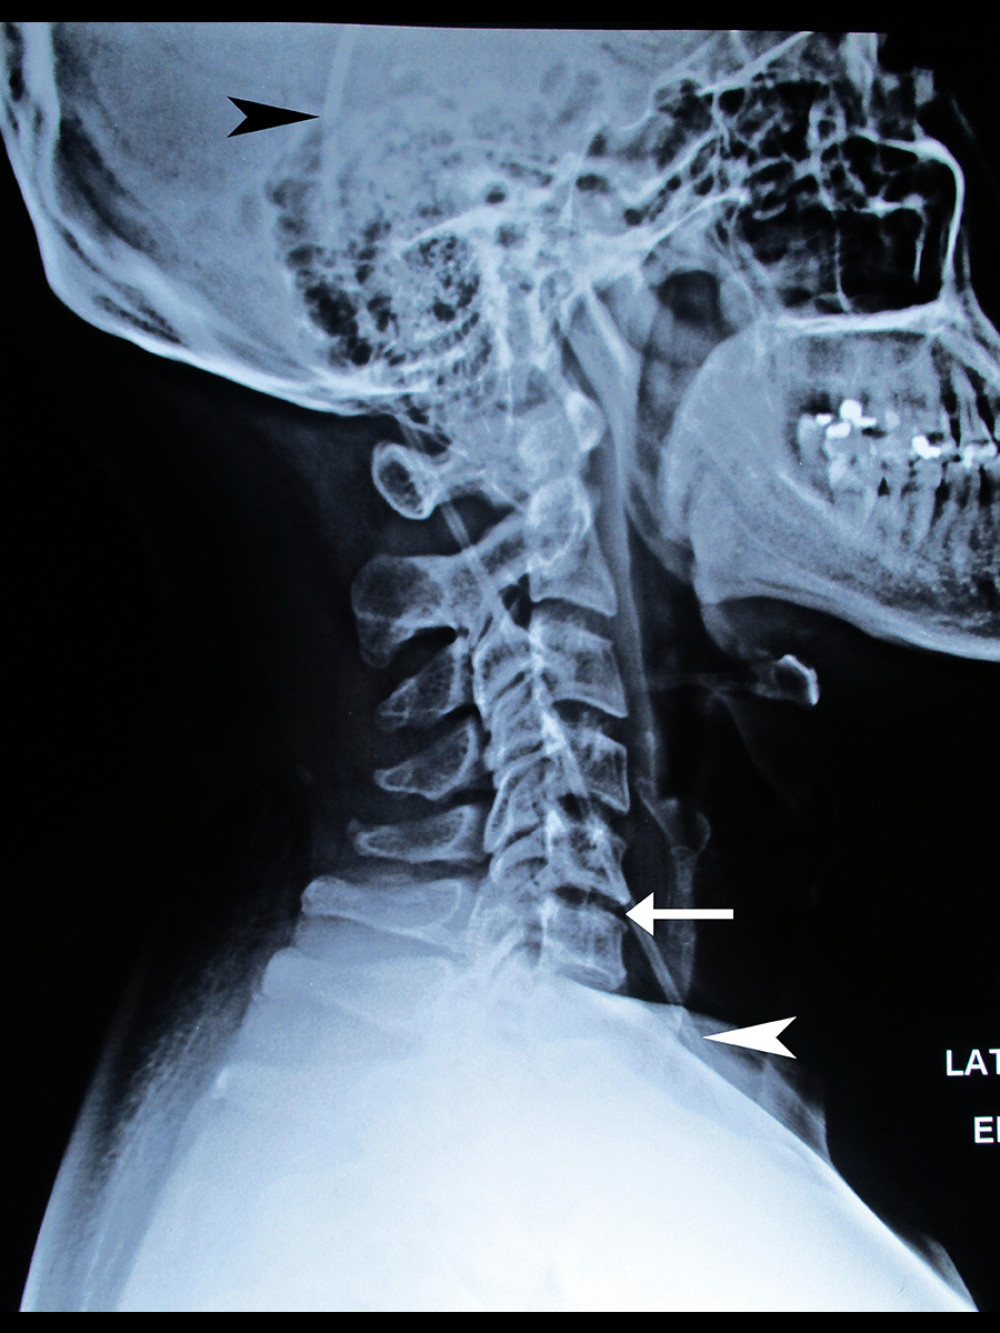 Lateral cervical spine radiograph. The cervical lordosis is visibly reduced (straightened cervical curve), and there is mild disc space narrowing at C5–6 (arrow). The ventriculoperitoneal shunt is also evident (arrowheads).